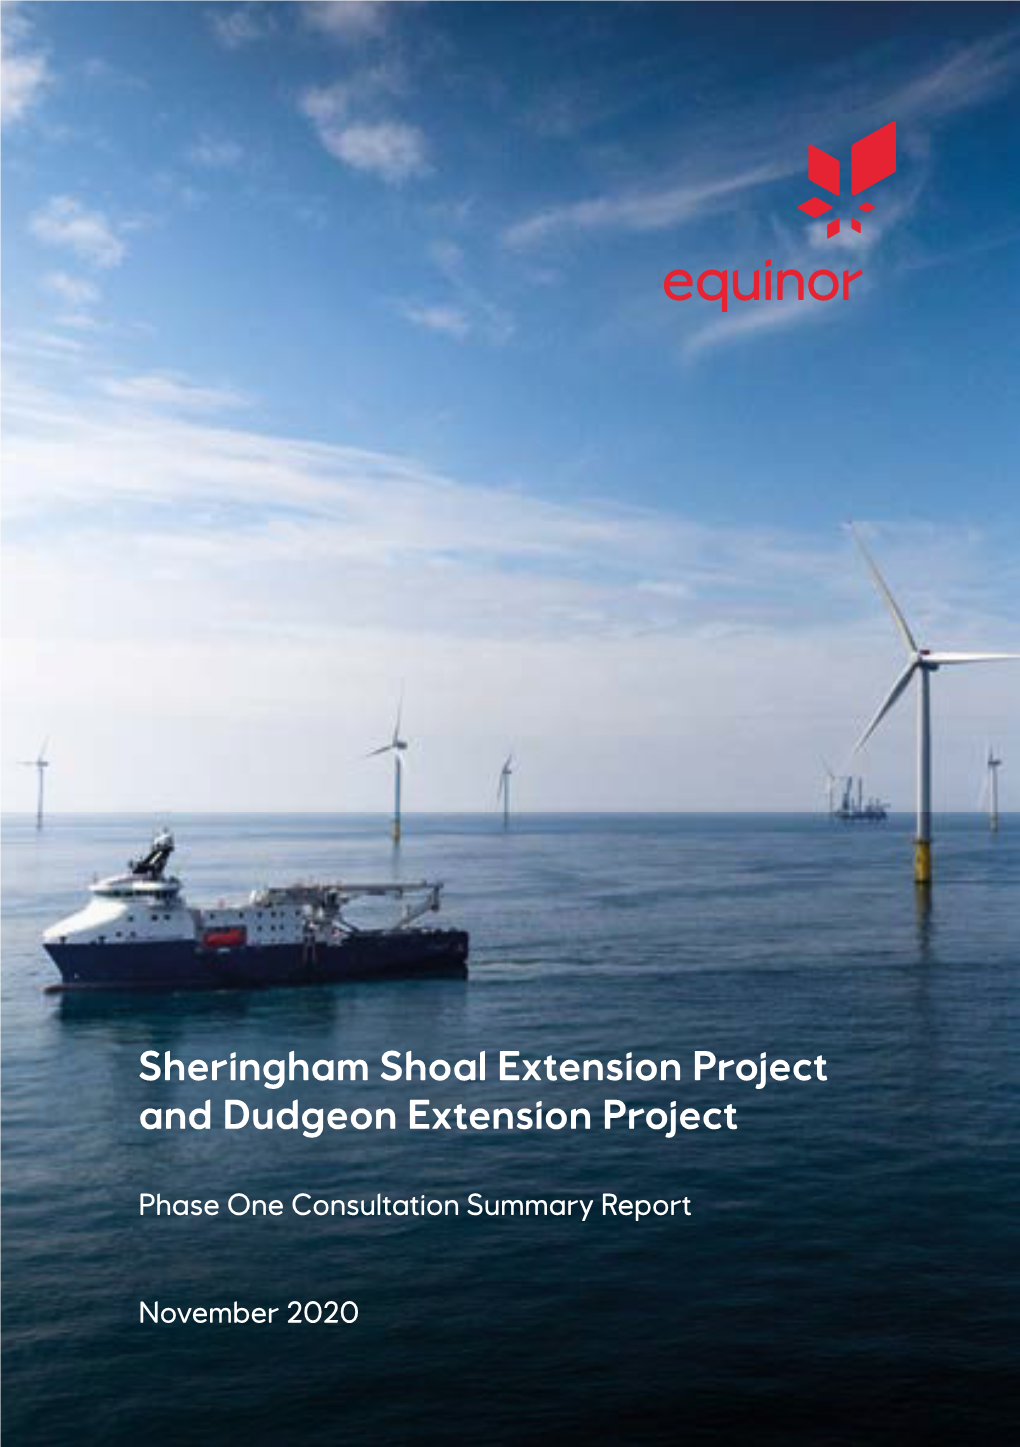 Sheringham Shoal Extension Project and Dudgeon Extension Project